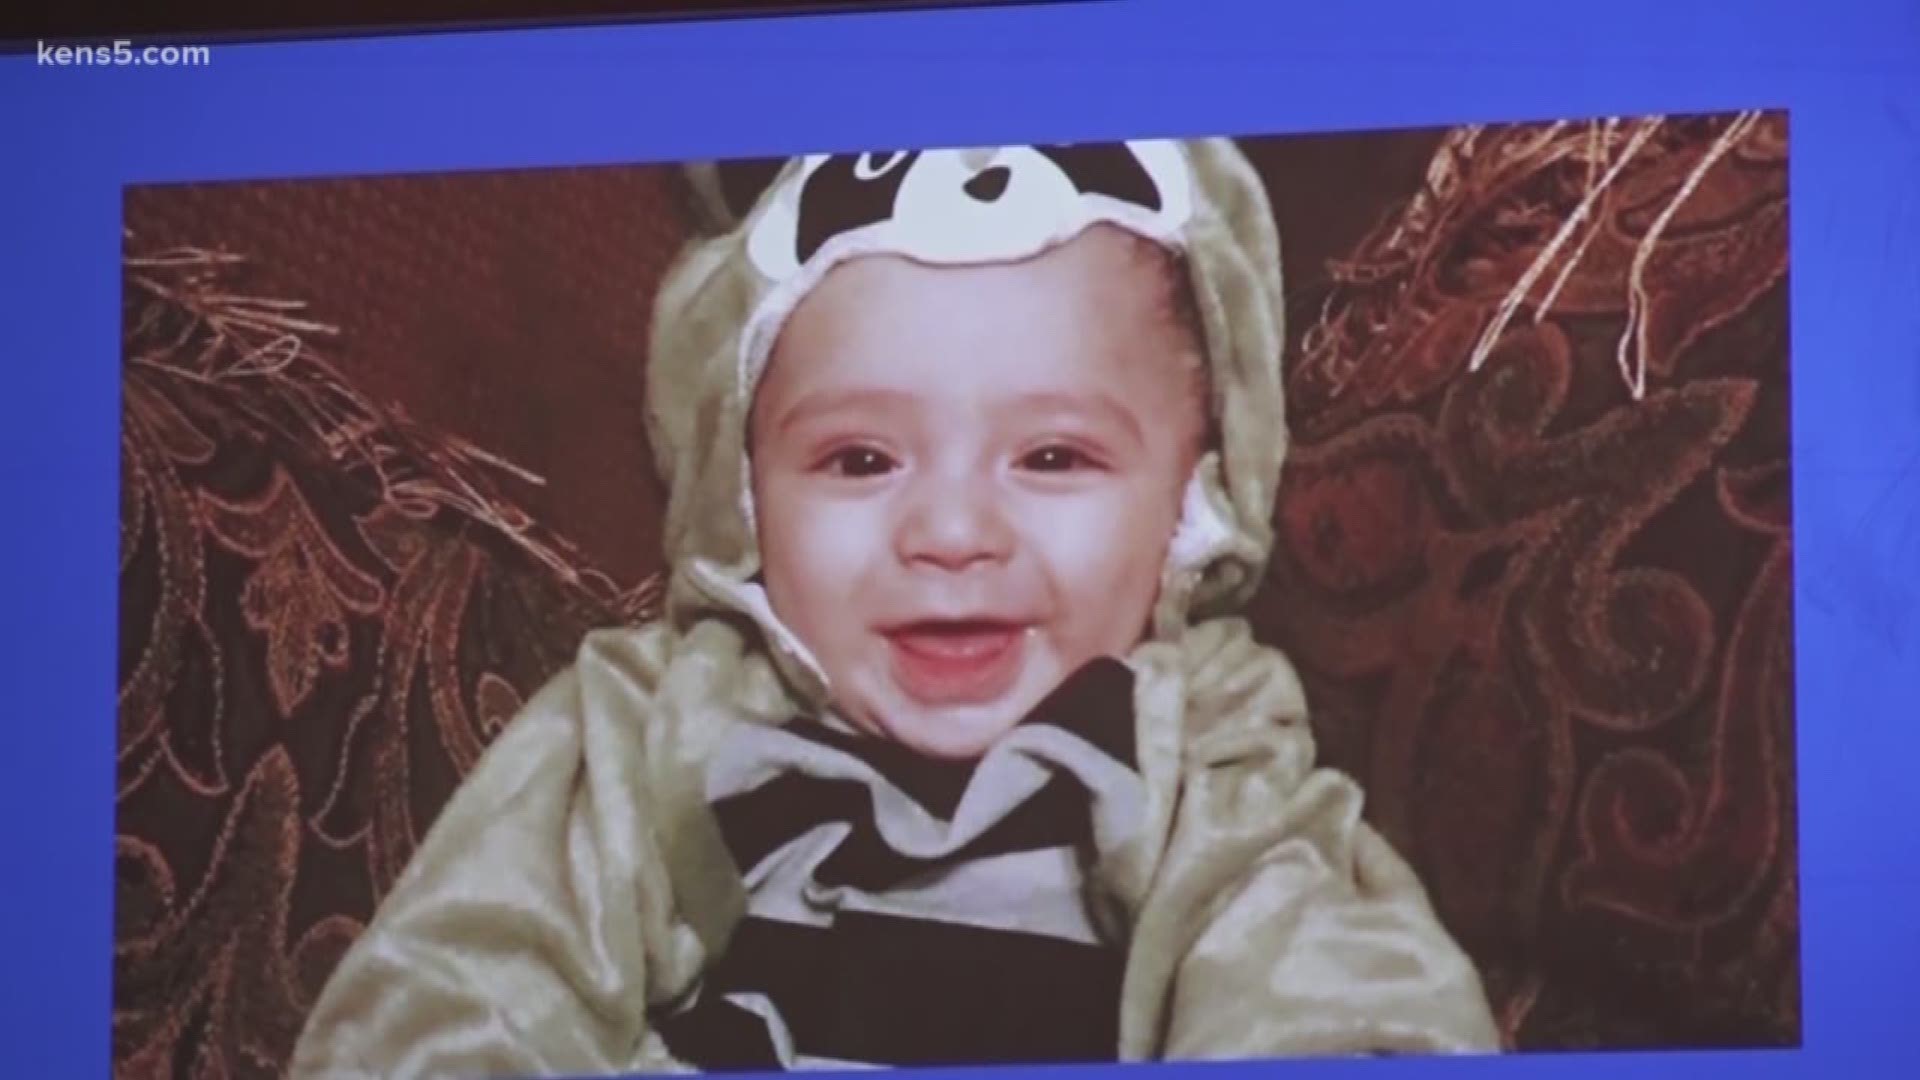 KENS 5's Charlie Cooper reports from the Bexar County Courthouse that baby King Jay Davila's father is expected to appear in court Wednesday.